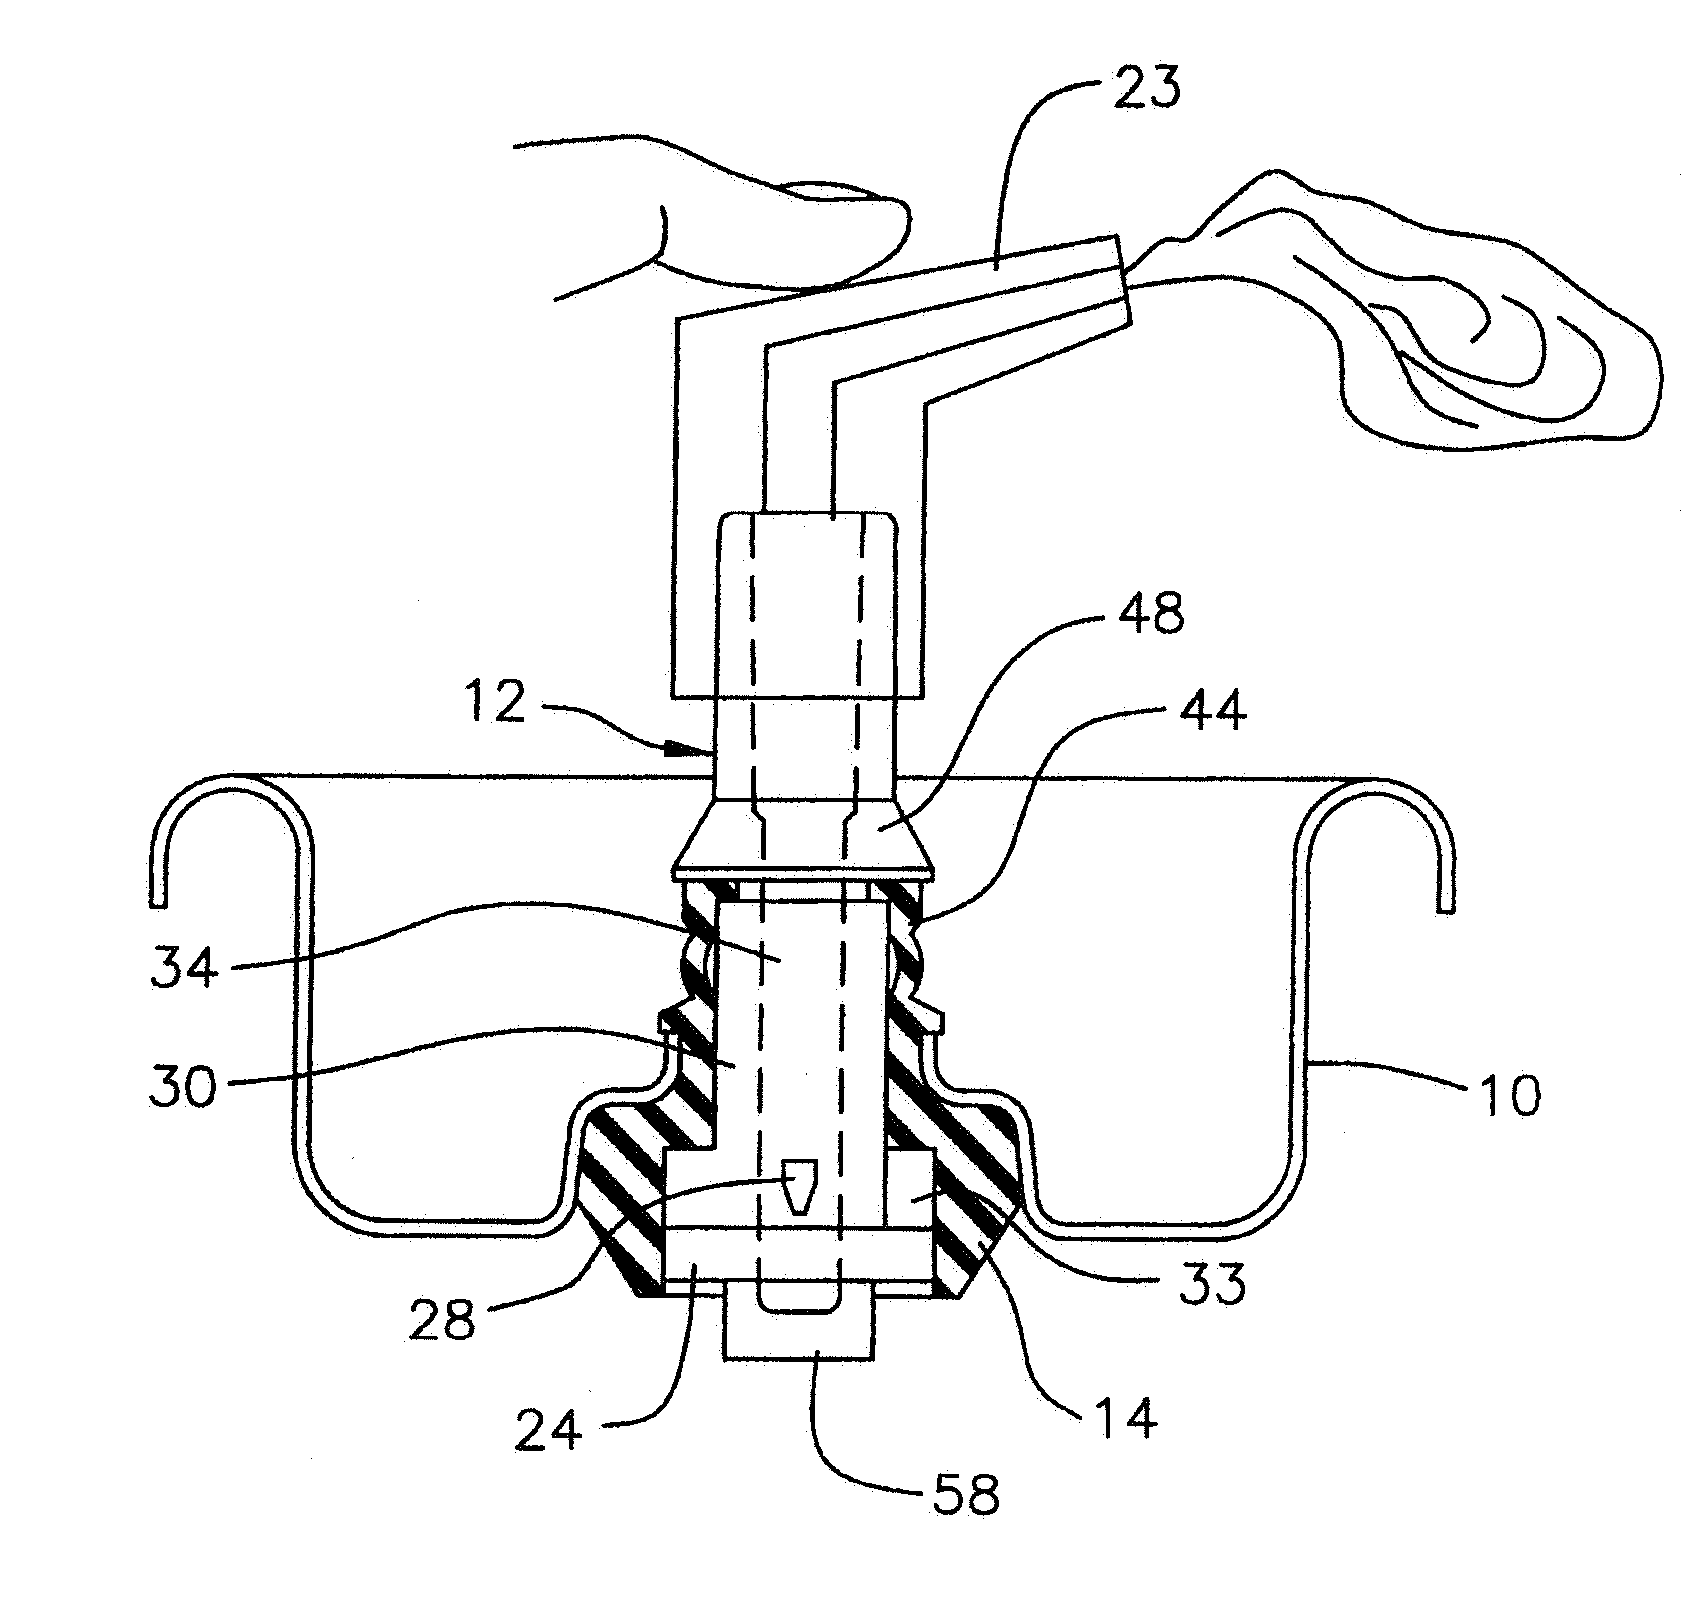 Valve for a pressurized dispensing container